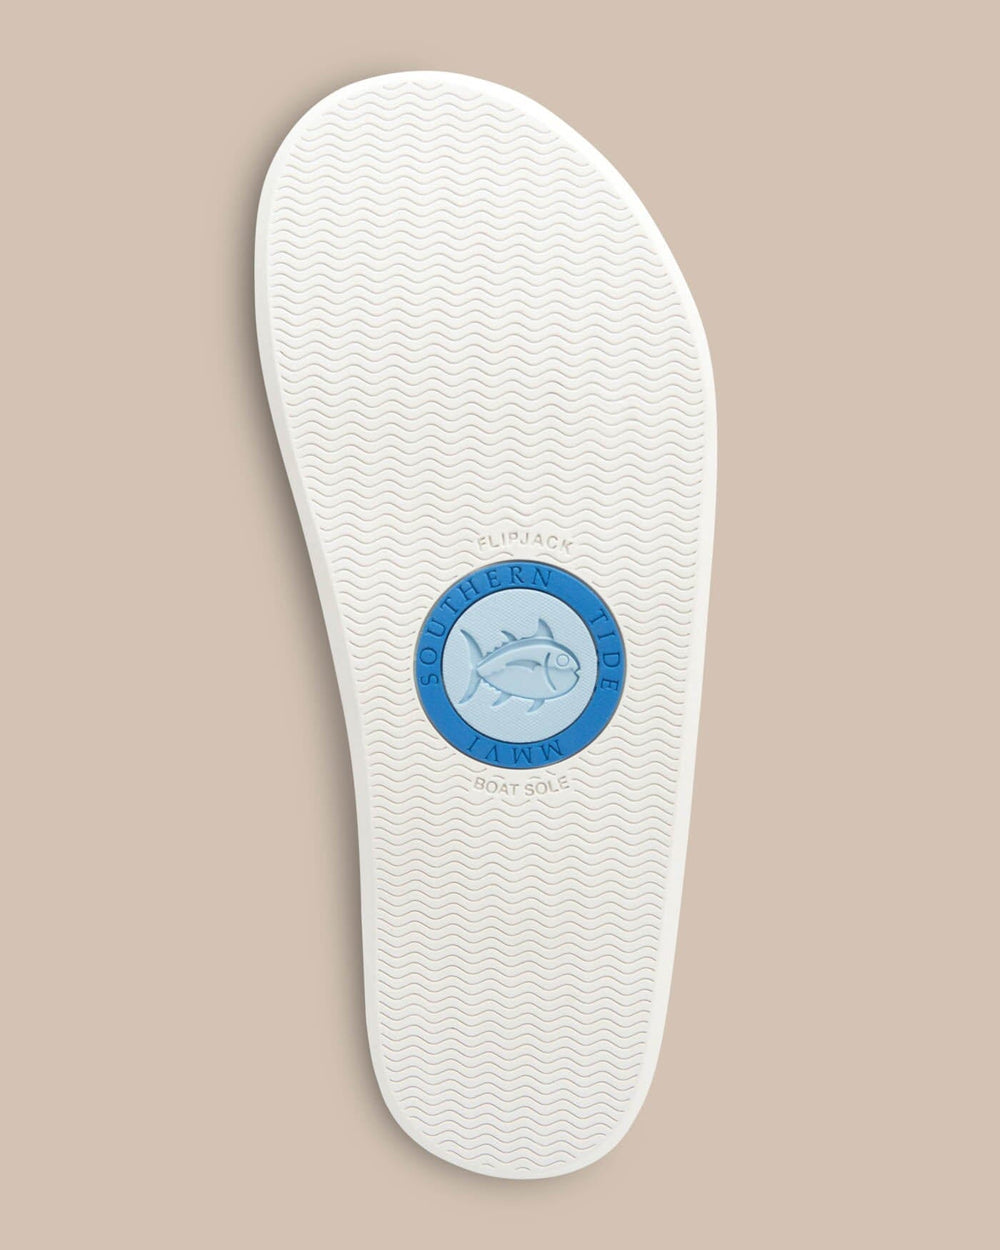 The back view of the Women's Weekend Metallic Silver Leather Flipjacks by Southern Tide - Metallic Silver